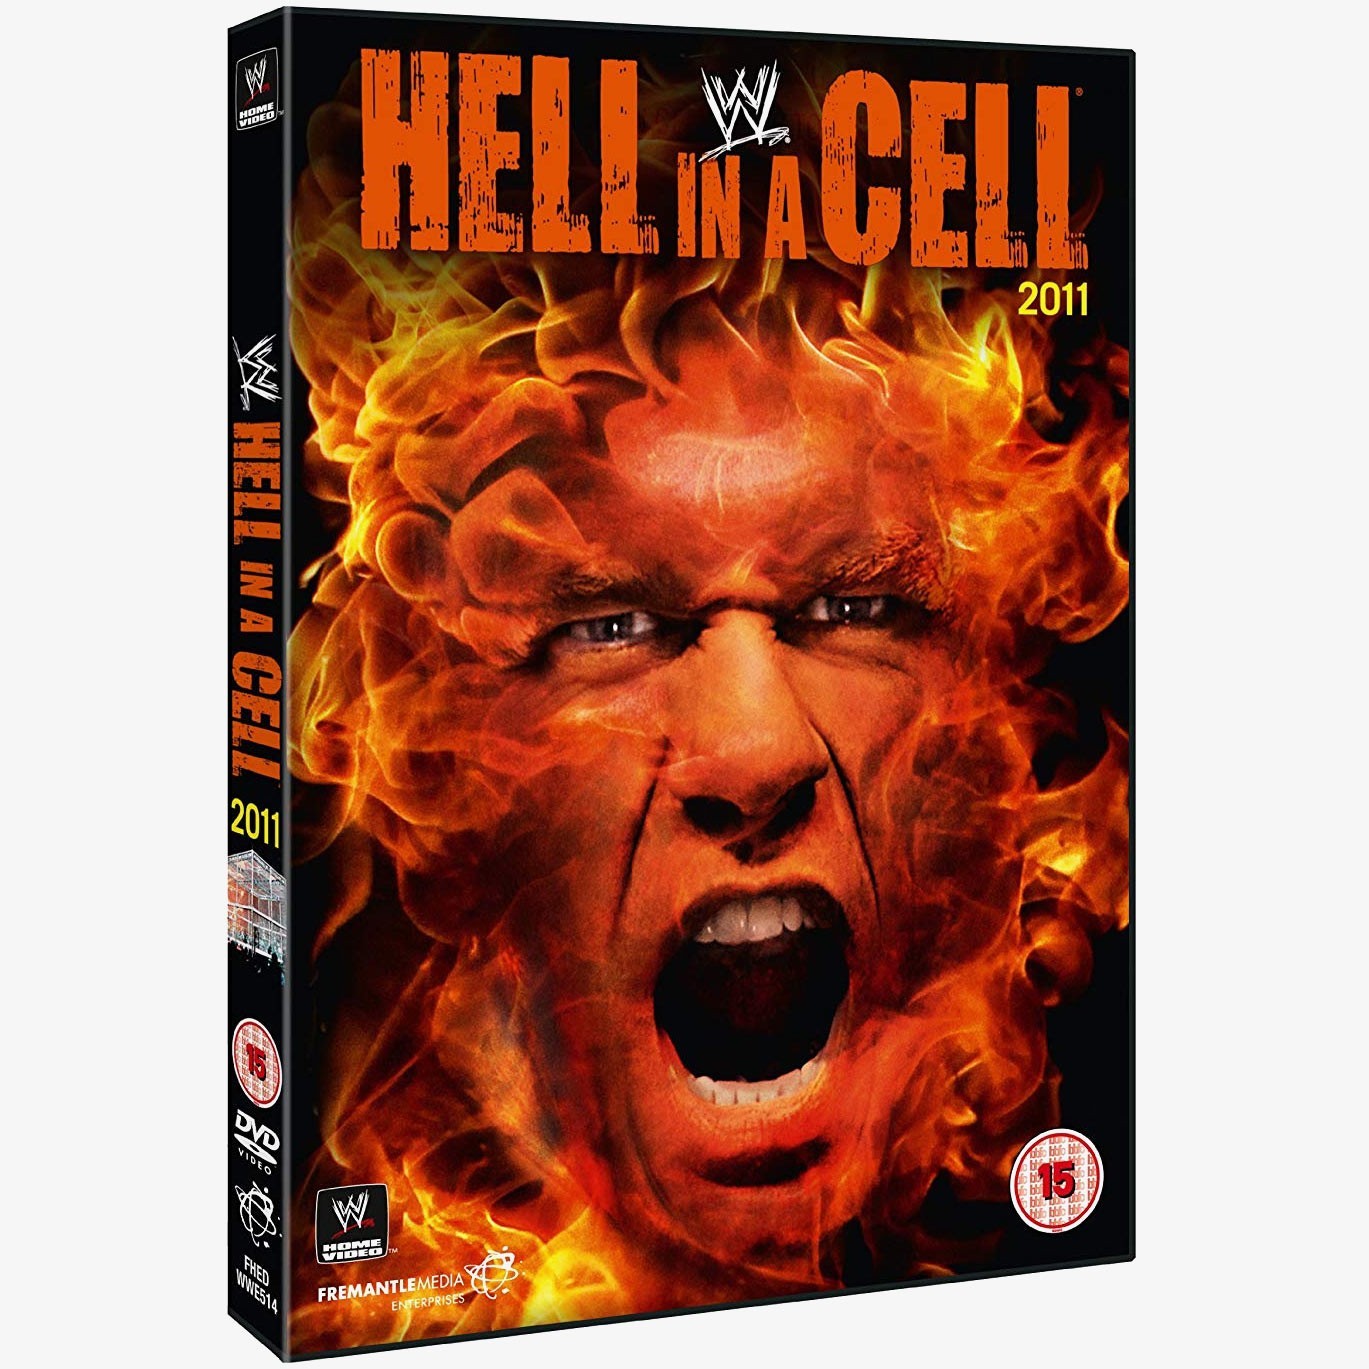 WWE Hell in a Cell 2011 DVD